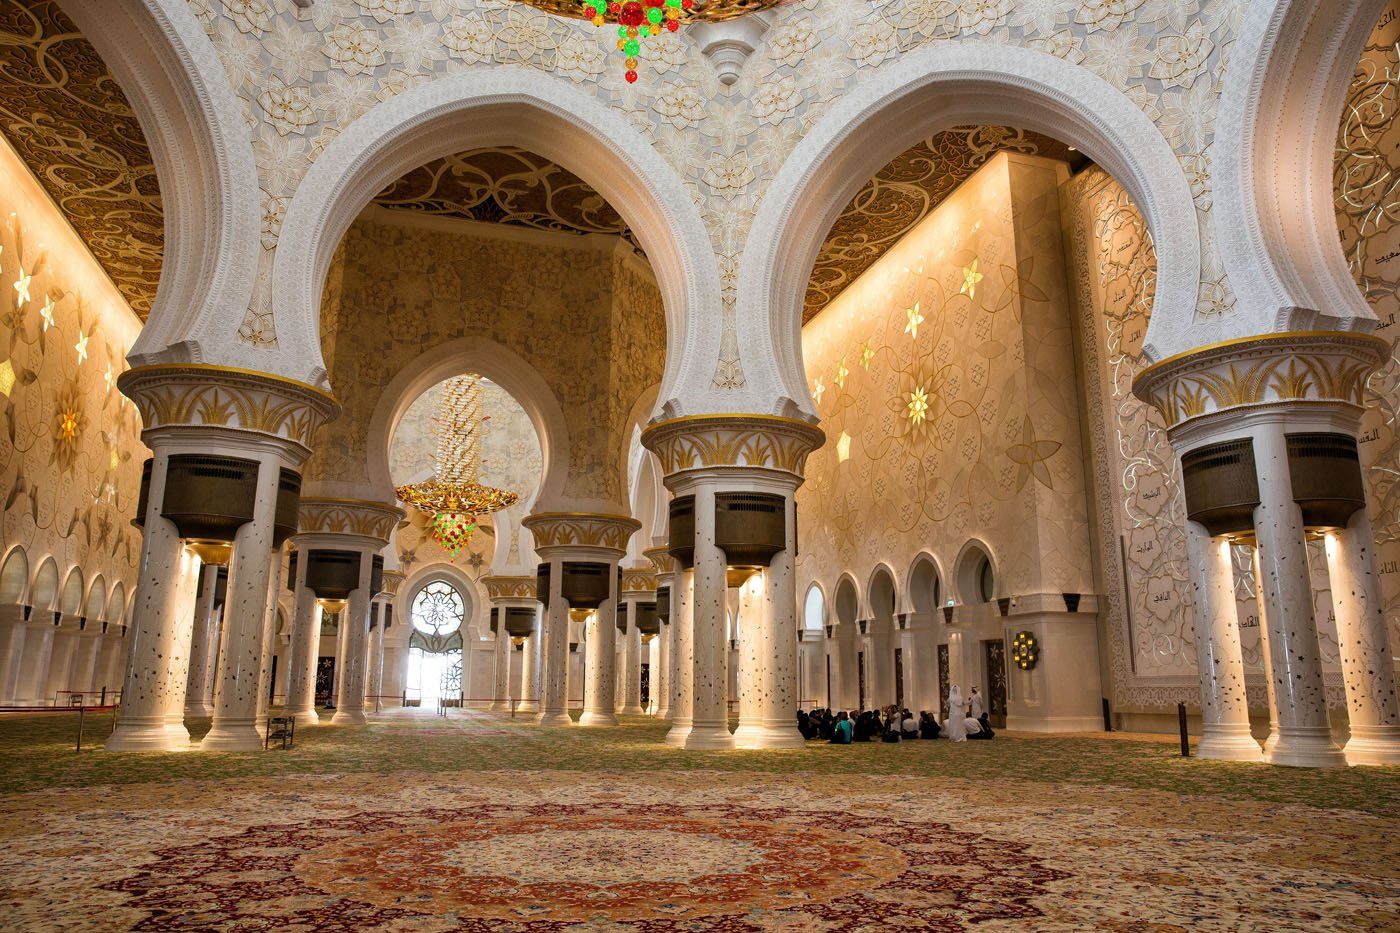 Inside the Sheikh Zayed Grand Mosque